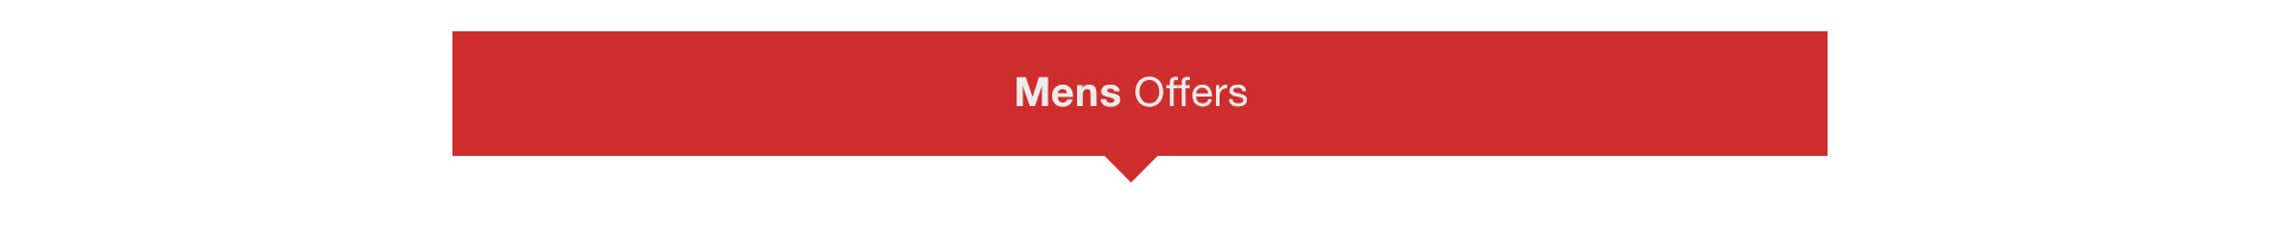 Mens Offers